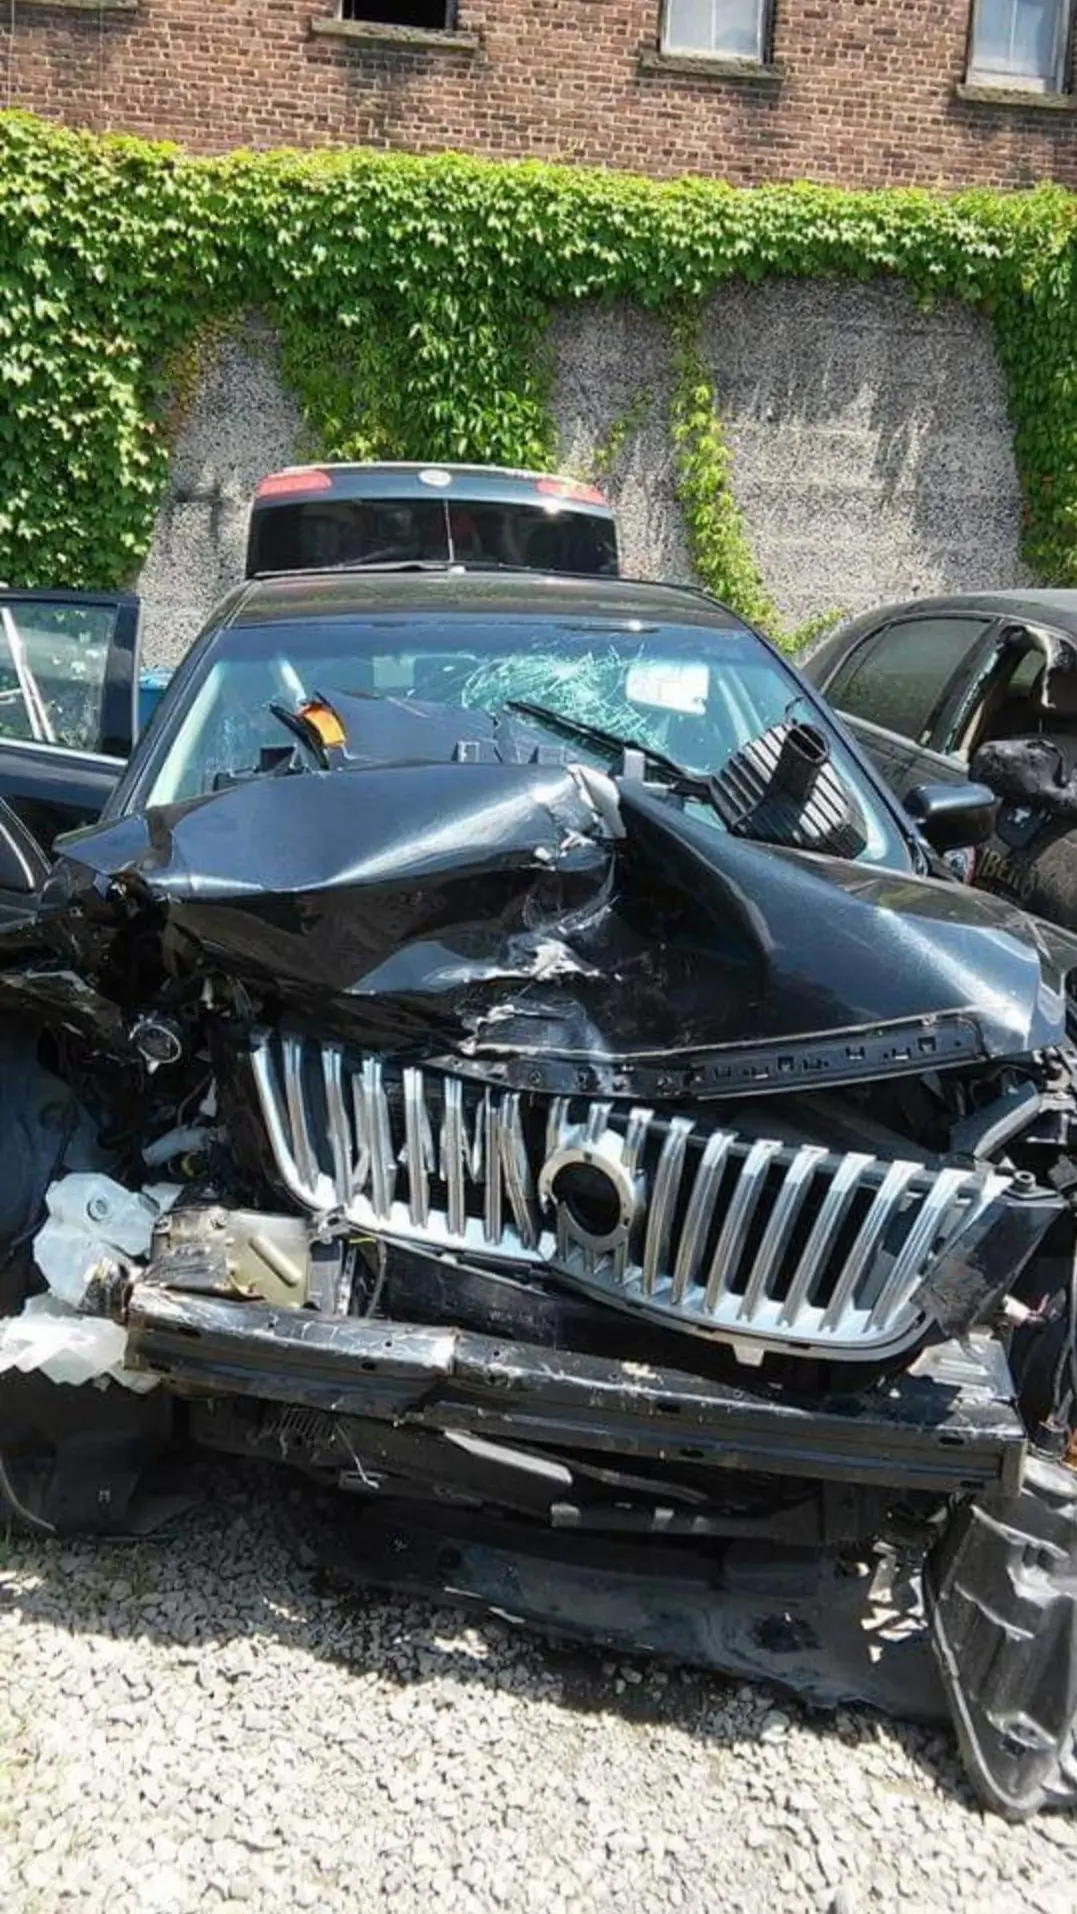 Edward X. Young of New Jersey says he was lucky to survive after his black Mercury Milan  crashed near Newark, N.J., on May 31, 2015. (Courtesy of Edward X. Young)